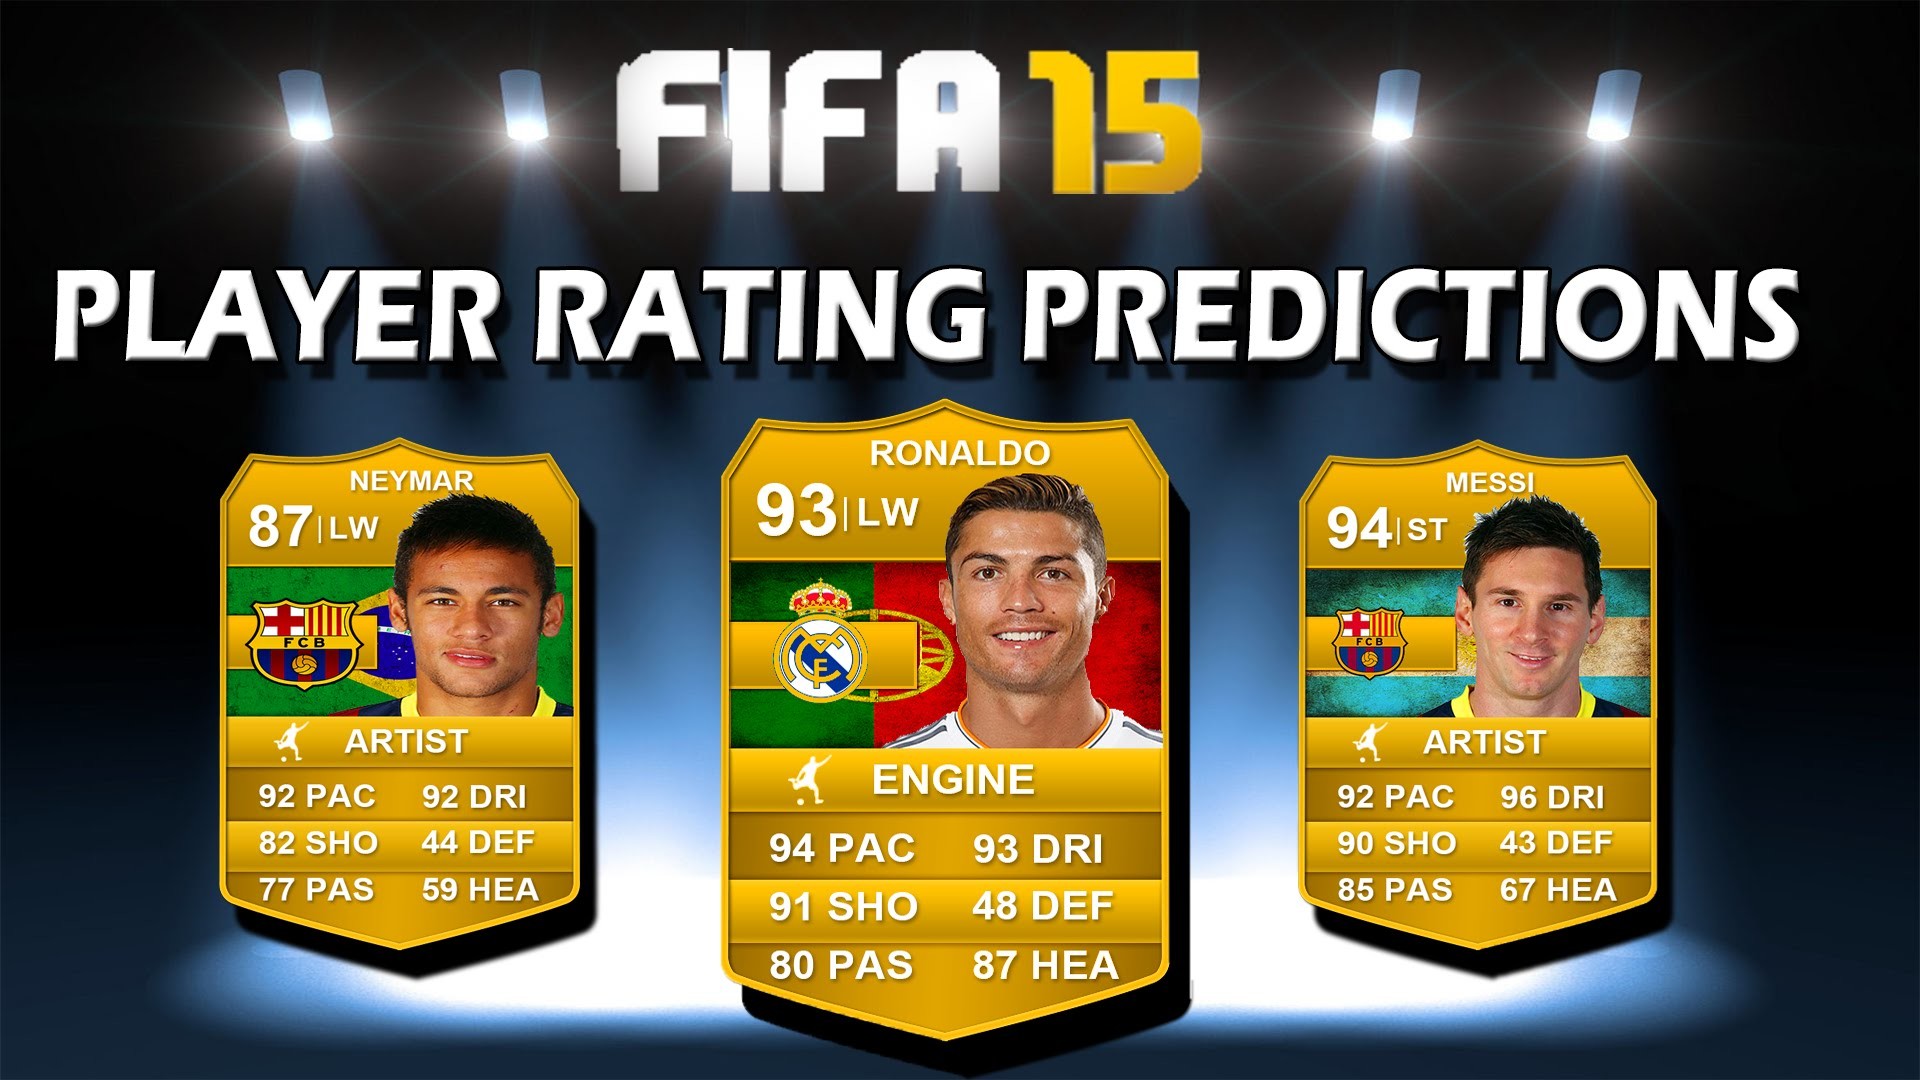 1920x1080 FIFA 15 - Player Rating Predictions + Stats - FT Ronaldo and Messi and  Neymar - YouTube